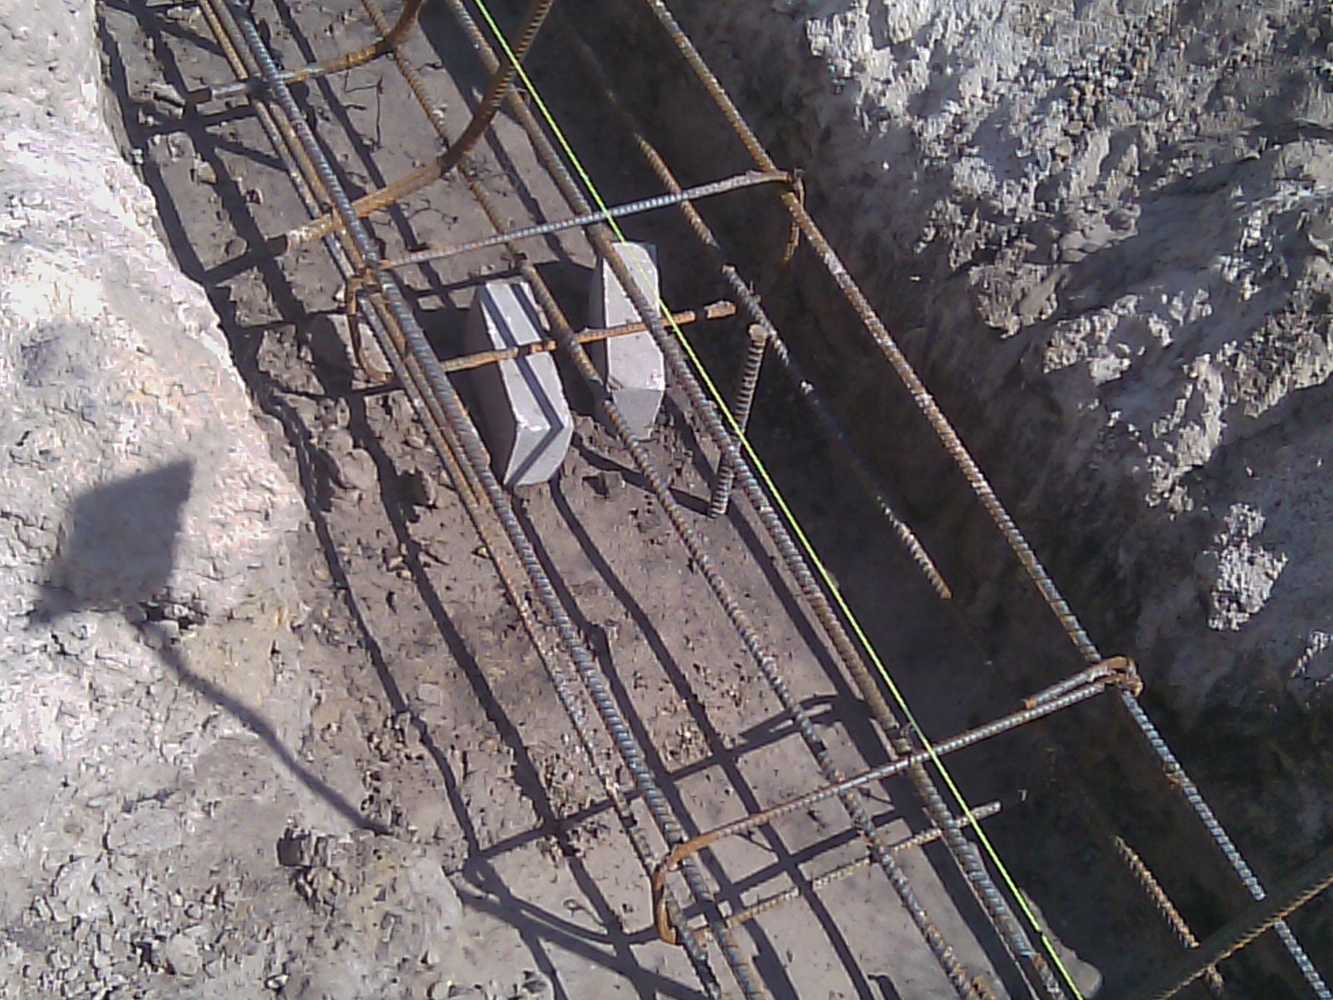 Concrete Footers with rebar supports. Inspected and passed